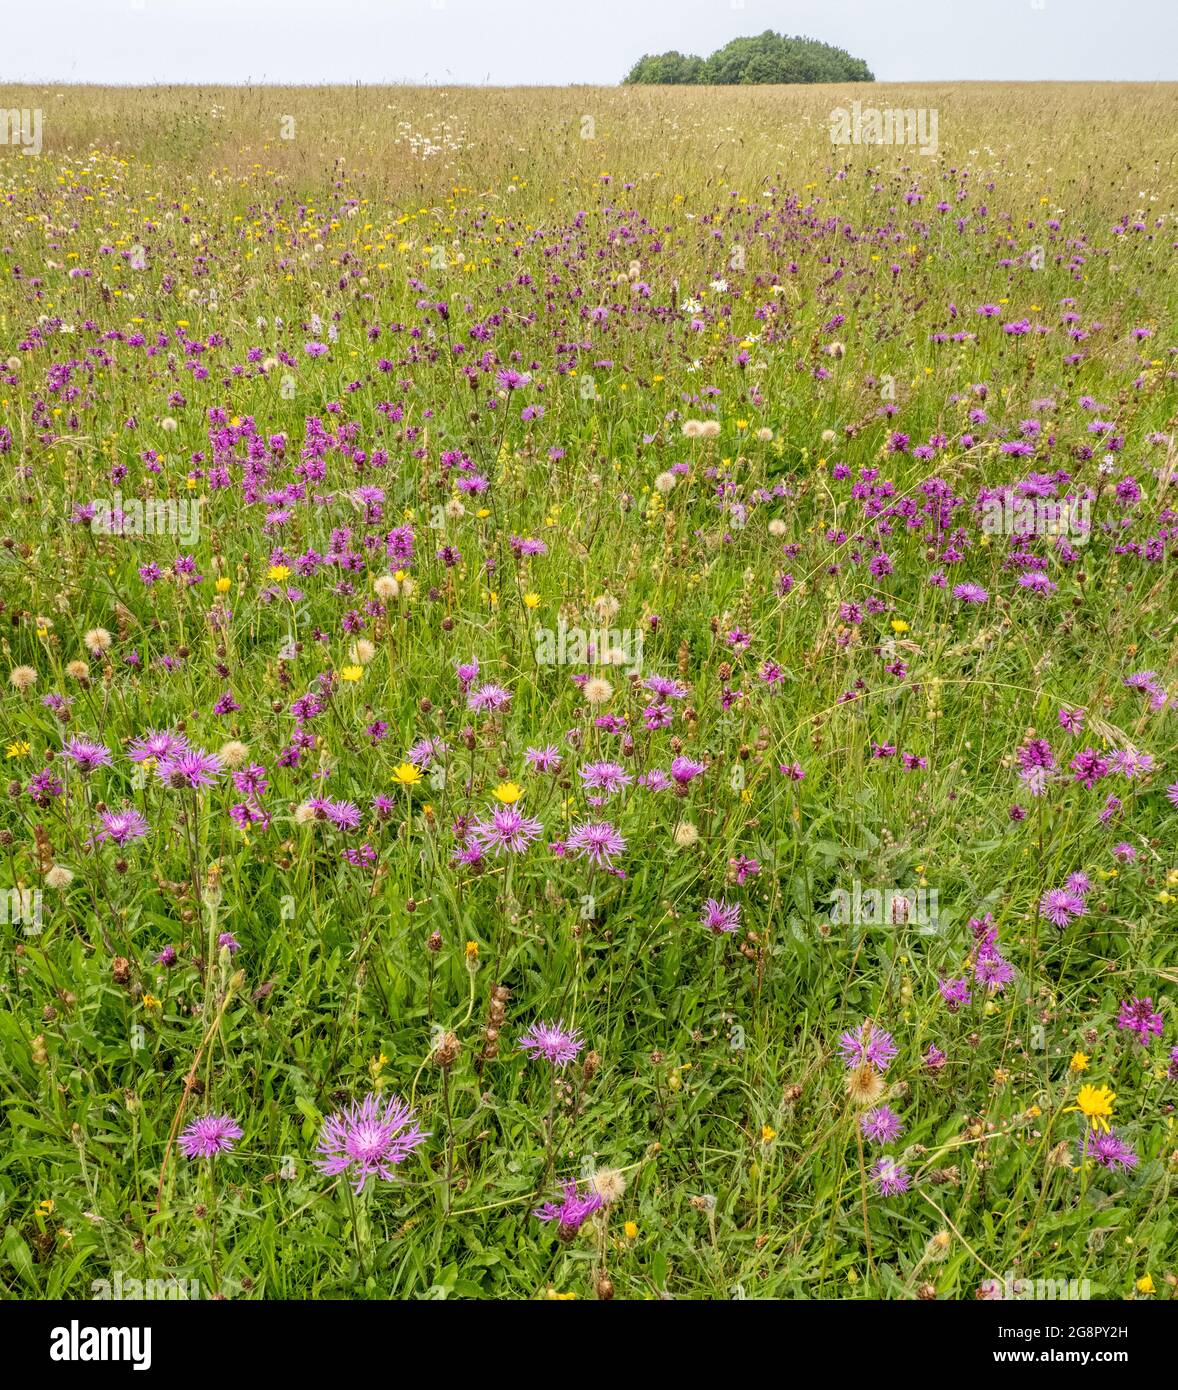 Species-rich flower meadow at Ashton Court near Bristol UK with Betony Greater Knapweed Oxeye Daisy Yellow Rattle Hawkbit and others Stock Photo